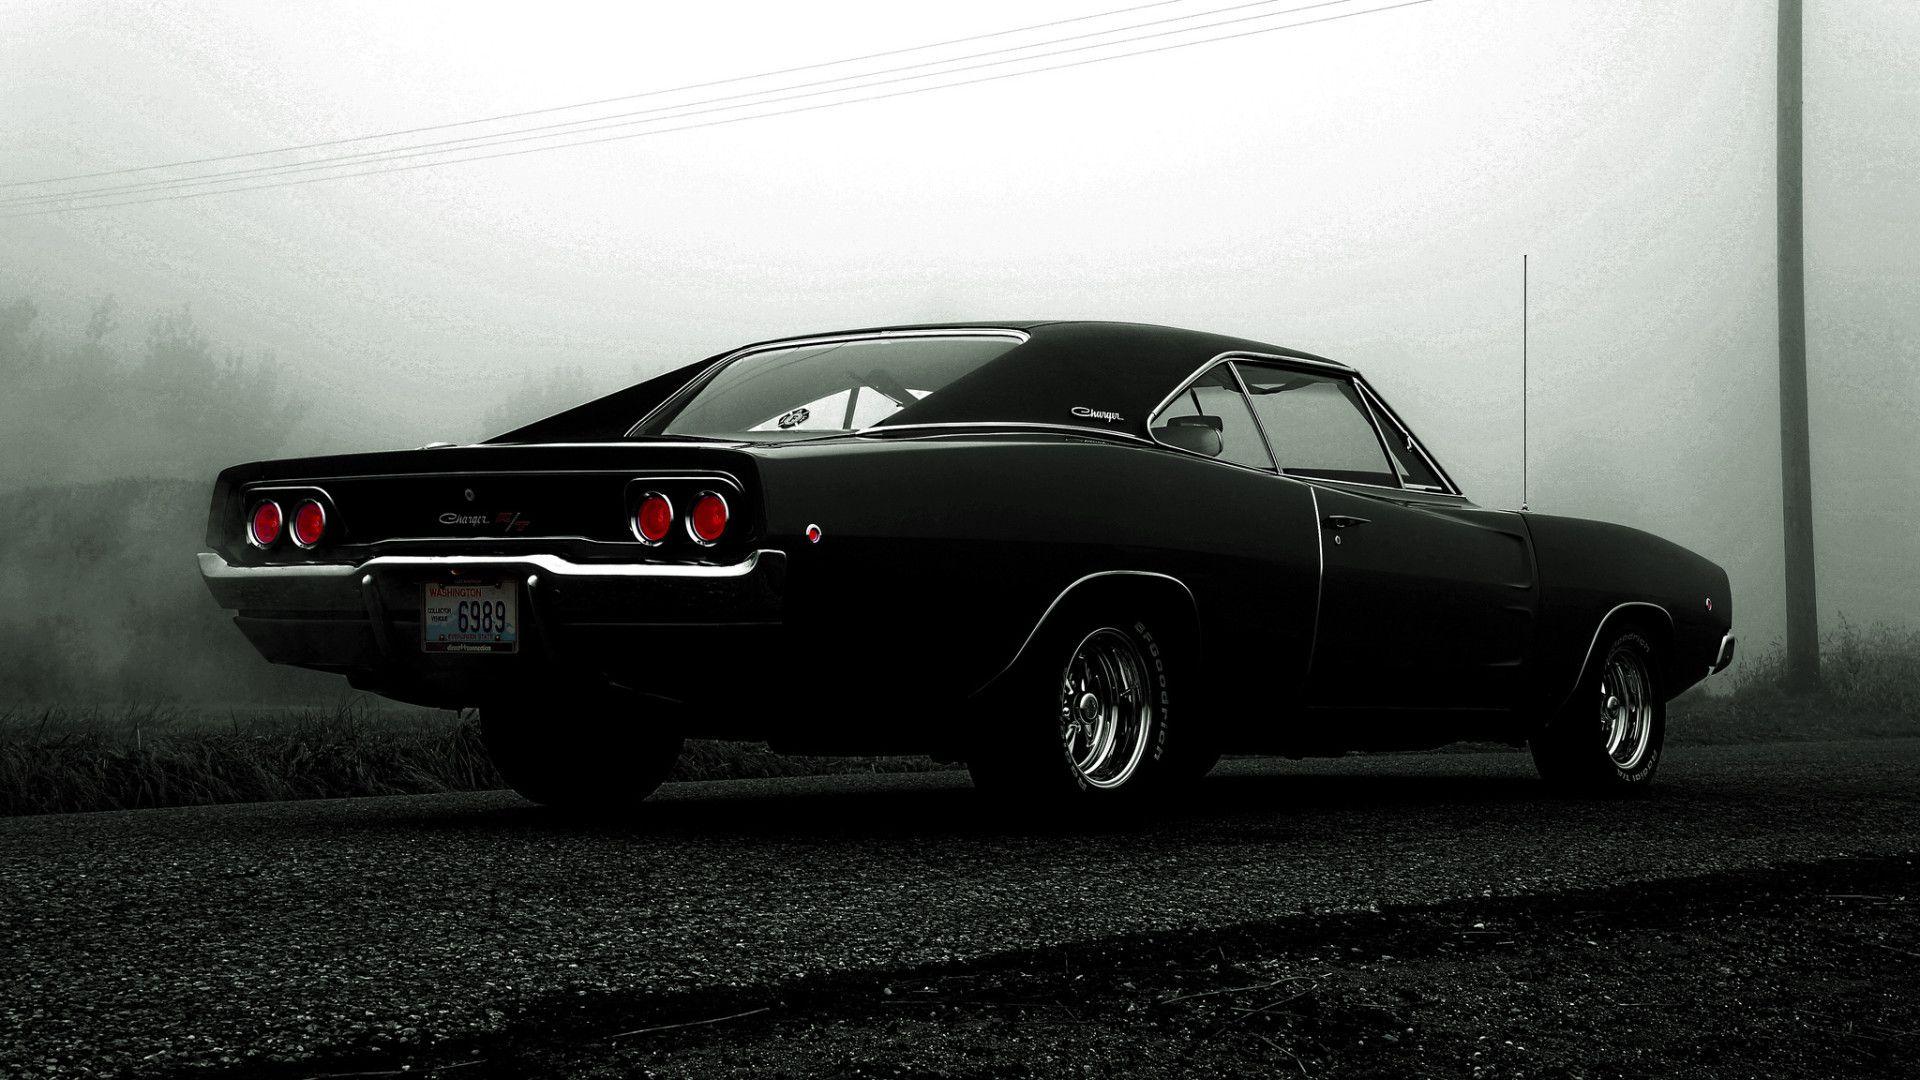 Dodge Charger Wallpapers - Wallpaper Cave